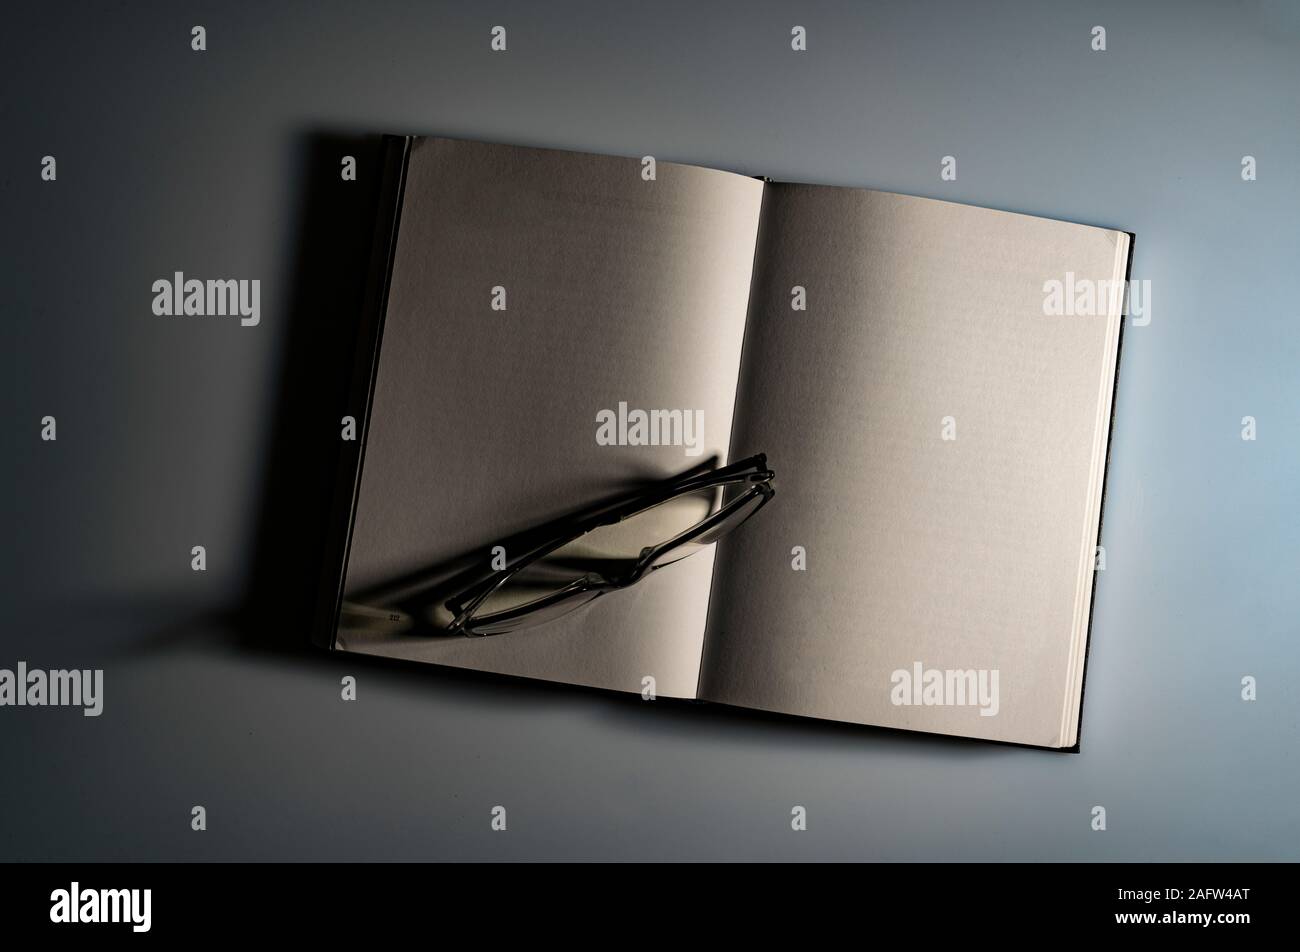 a pair of glasses on the blank pages of a book Stock Photo